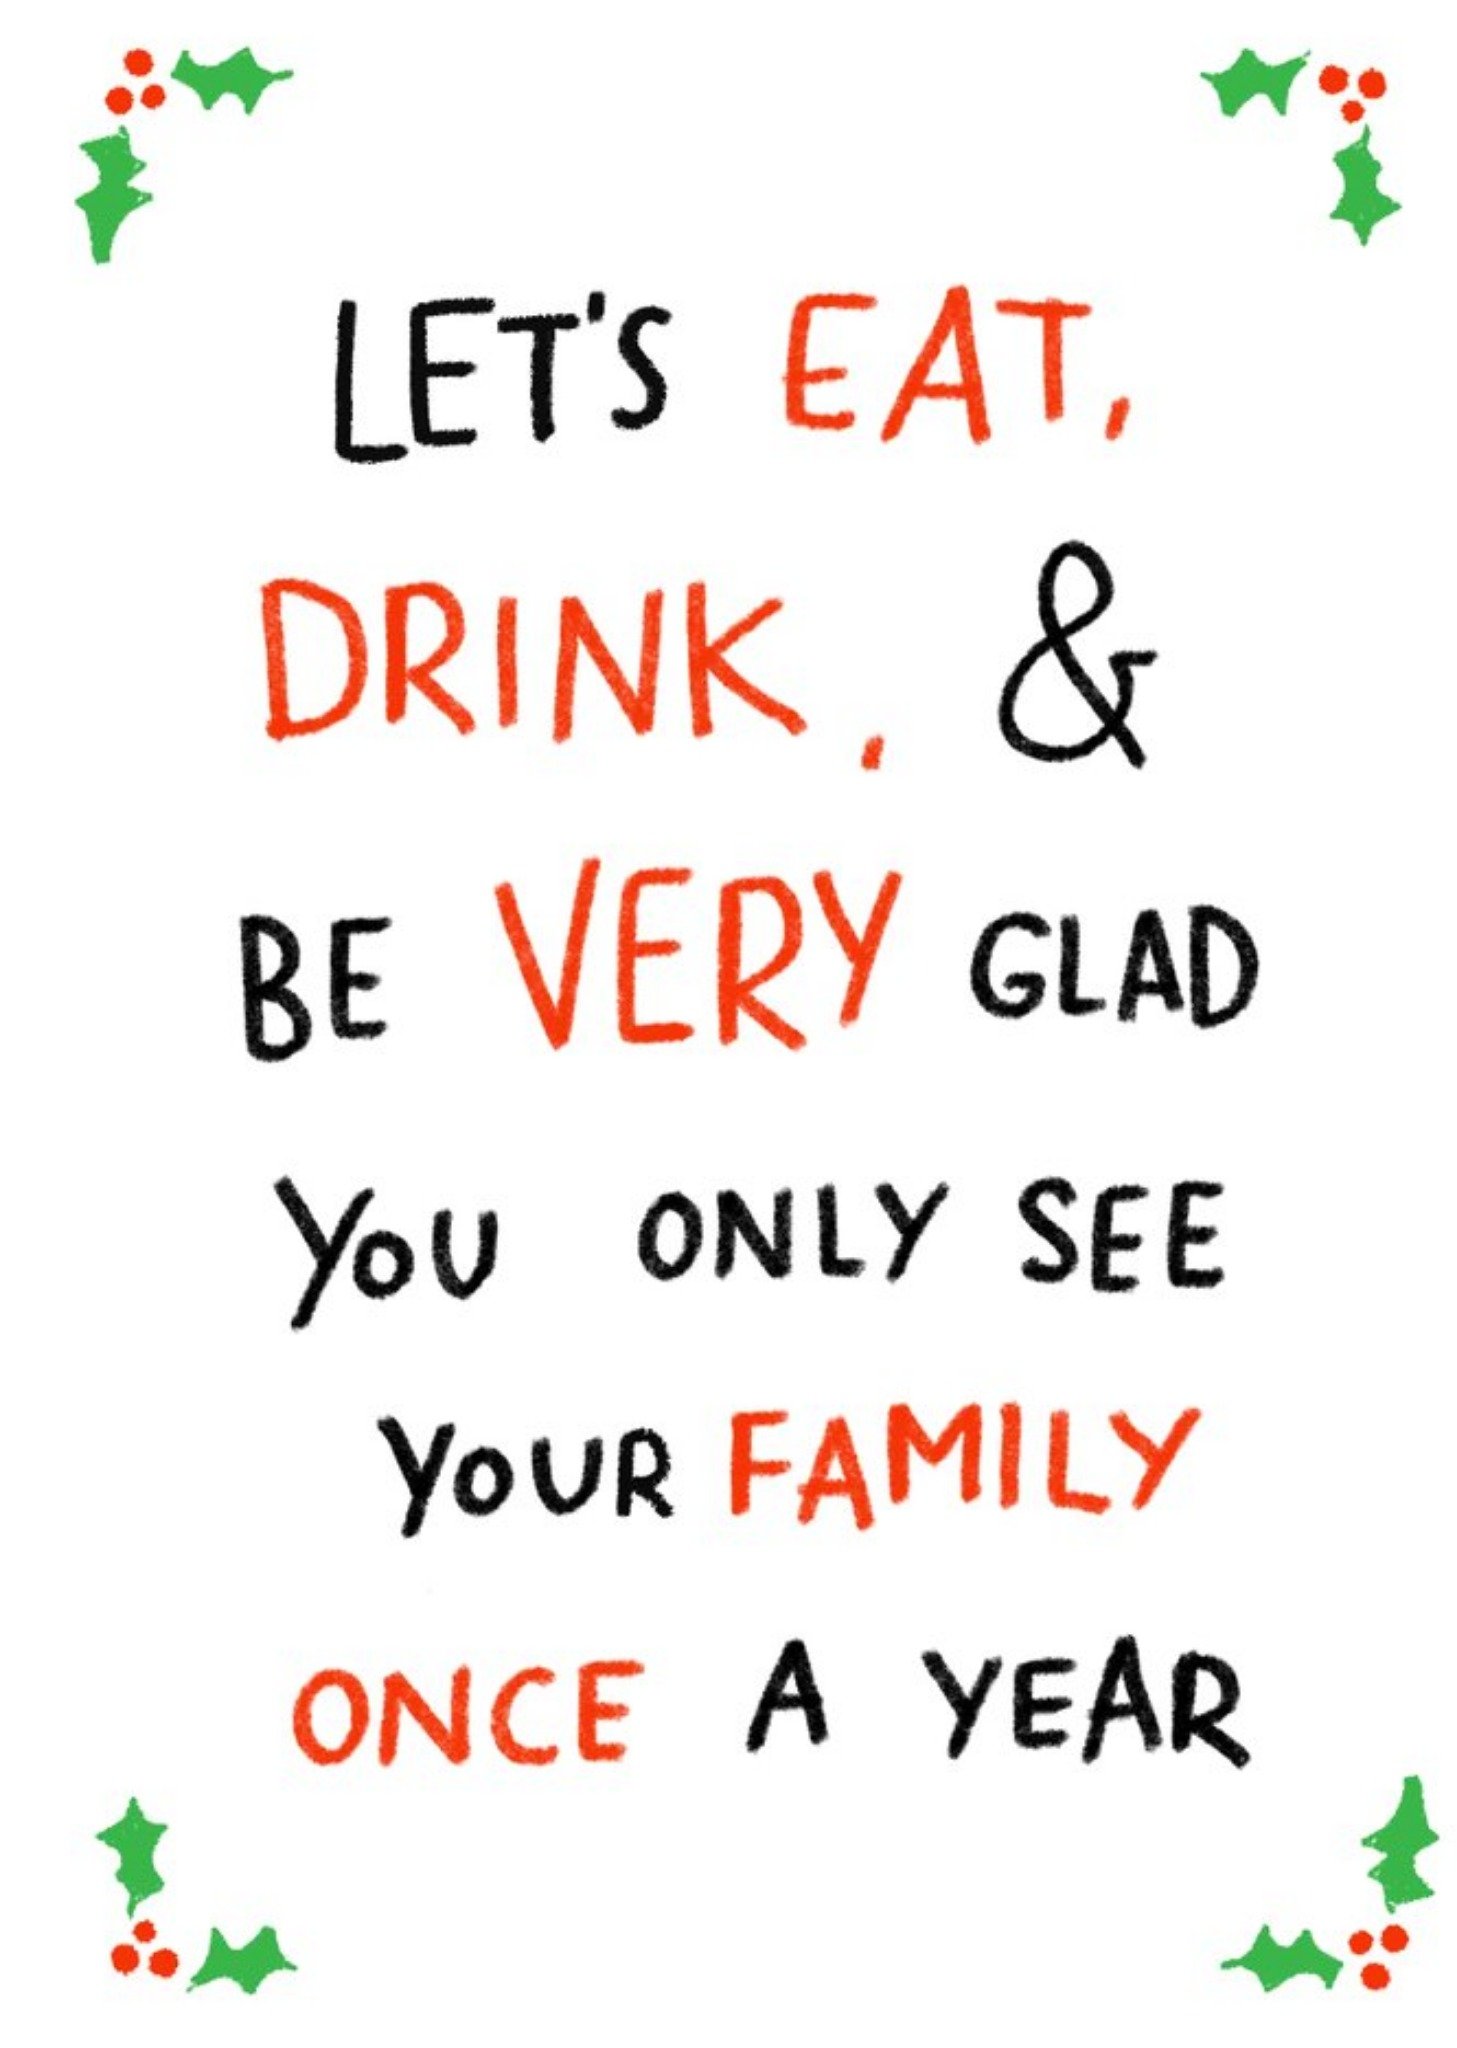 Moonpig Funny Christmas Card Let's Eat, Drink & Be Very Glad Ecard